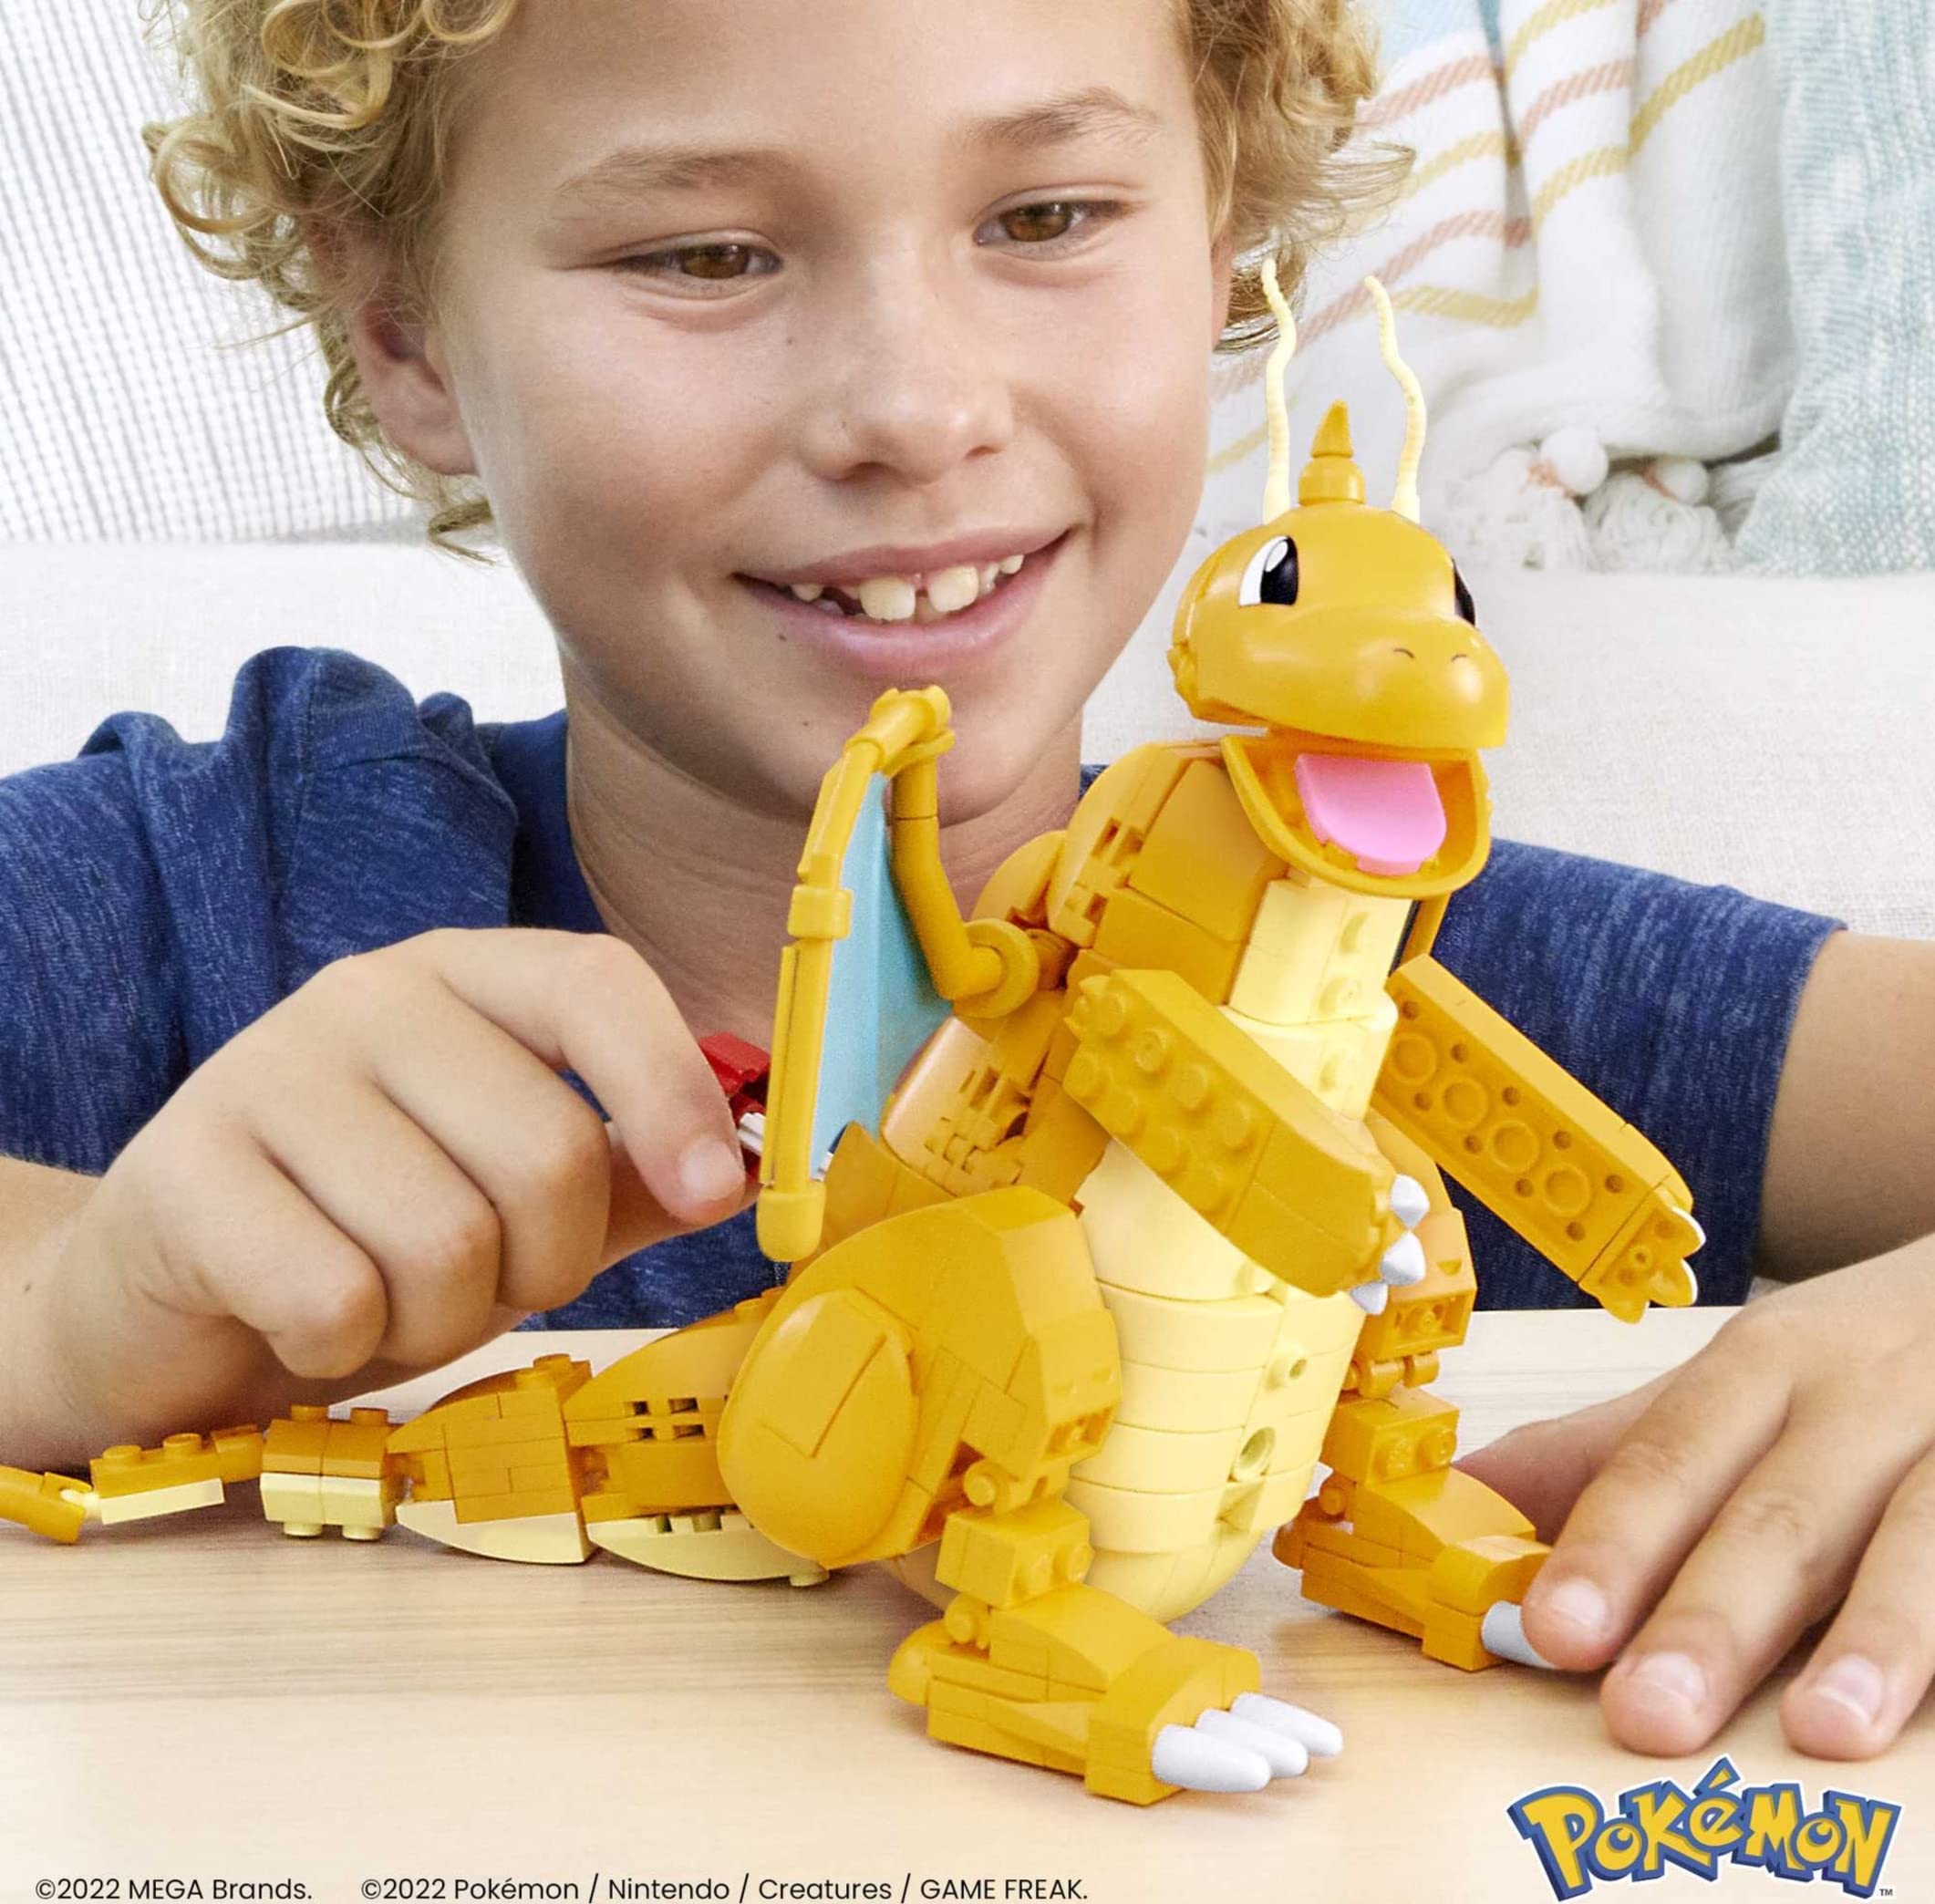 MEGA Pokémon Action Figure Building Toys For Kids, Dragonite With 388 Pieces And Wing Flapping Motion, Age 9+ Years Old Gift Idea